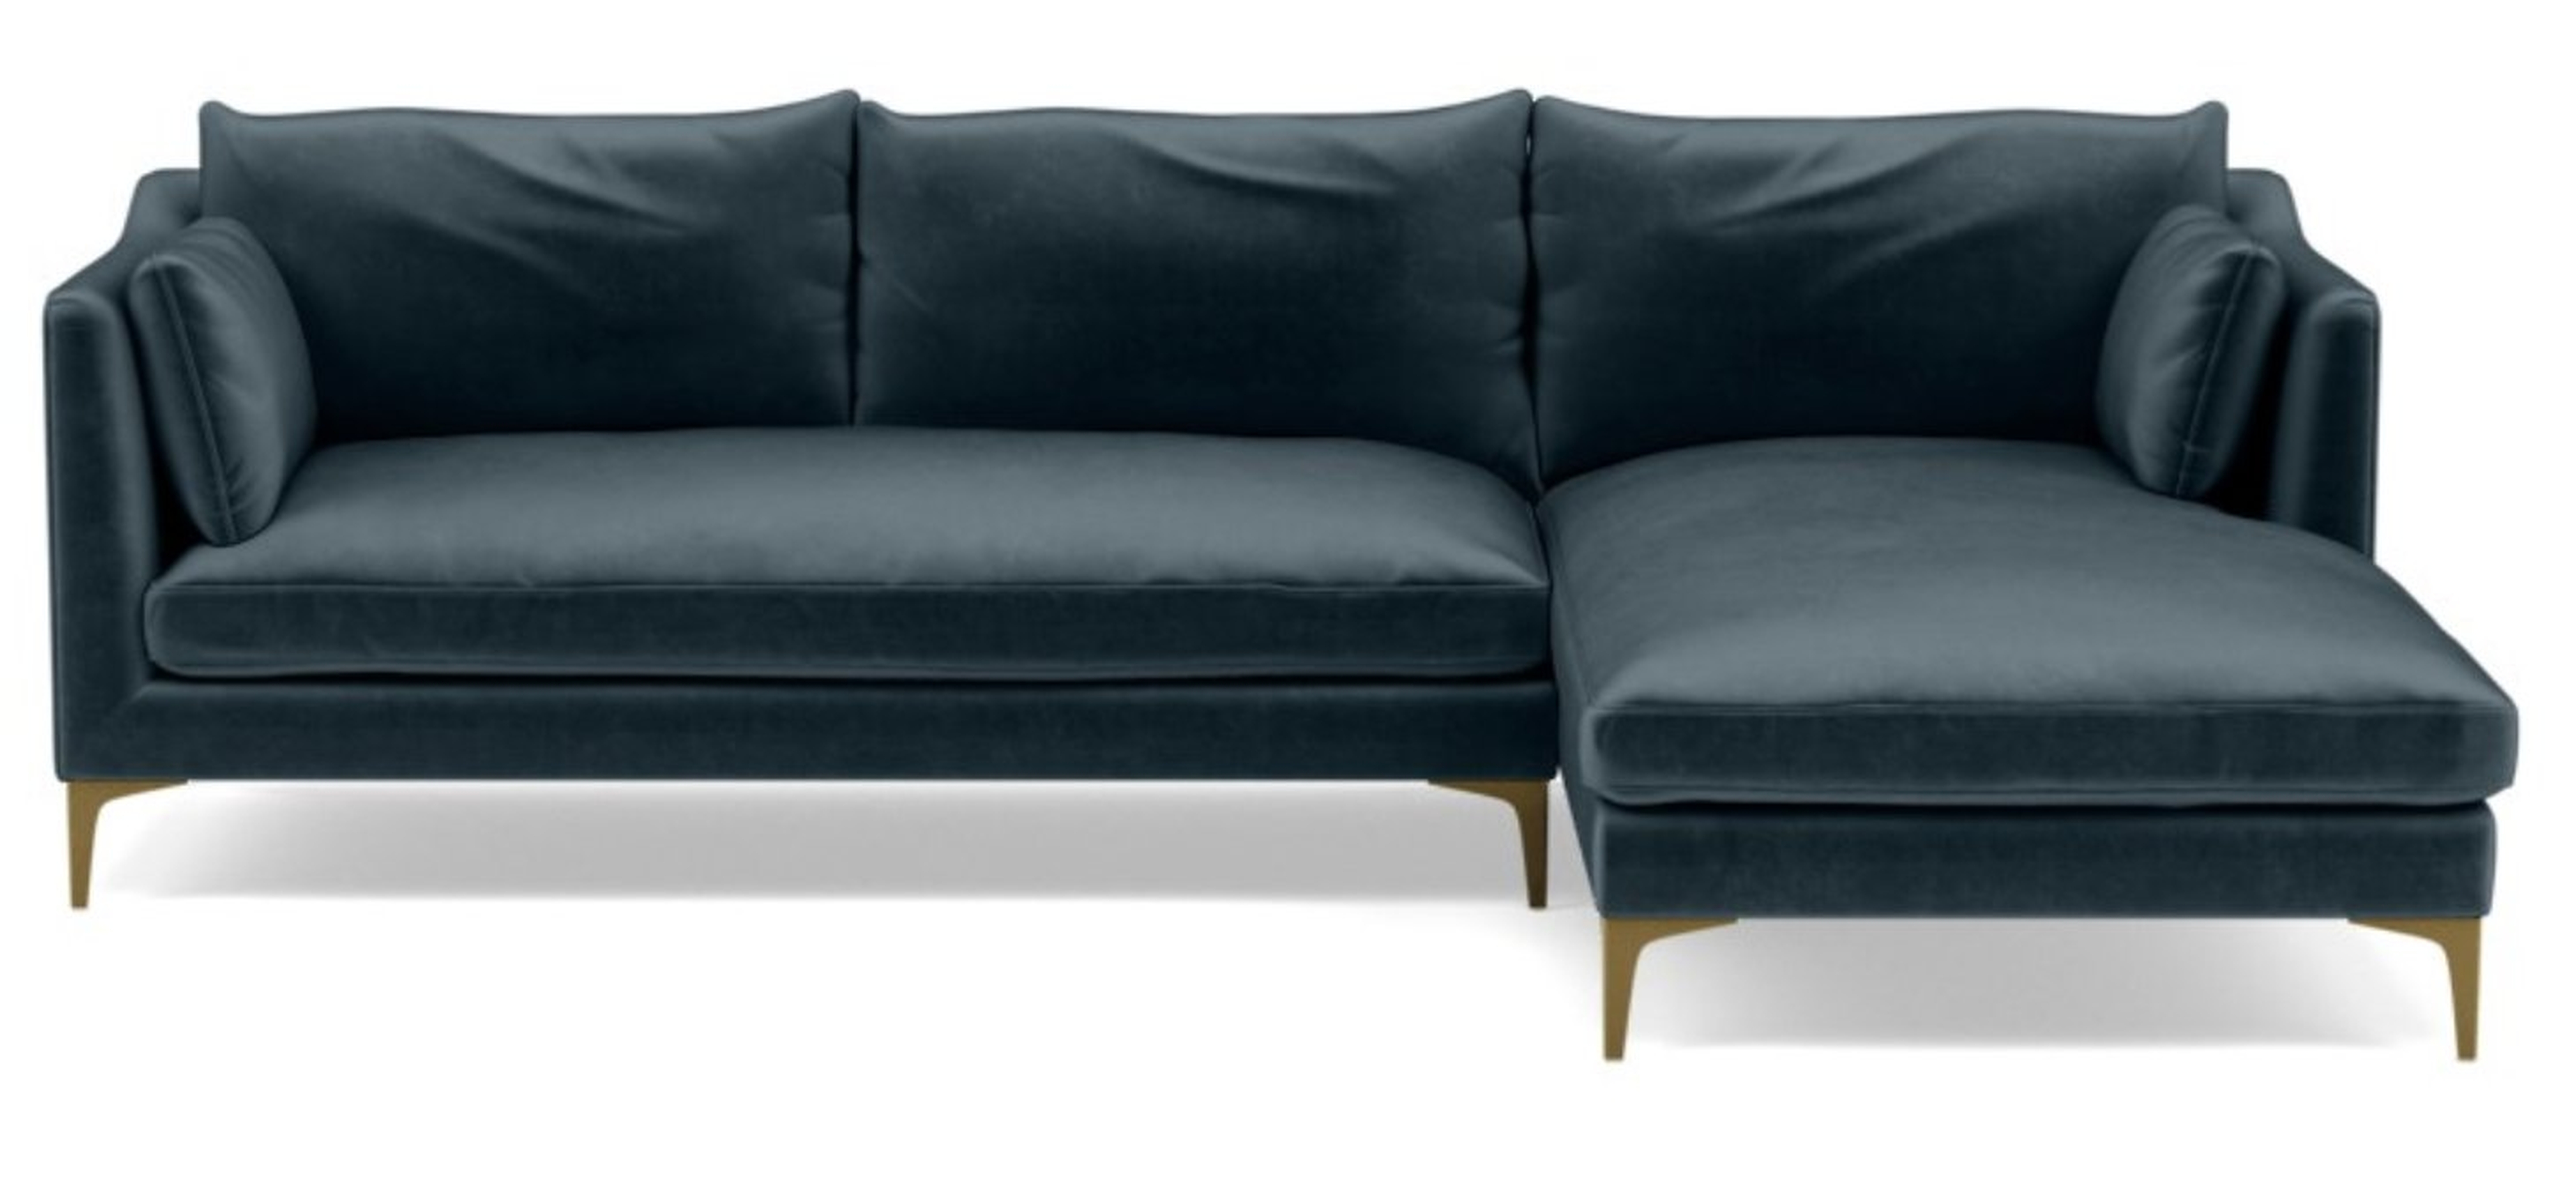 CAITLIN BY THE EVERYGIRL Sectional Sofa with Right Chaise - Sapphire Mod Velvet - Interior Define